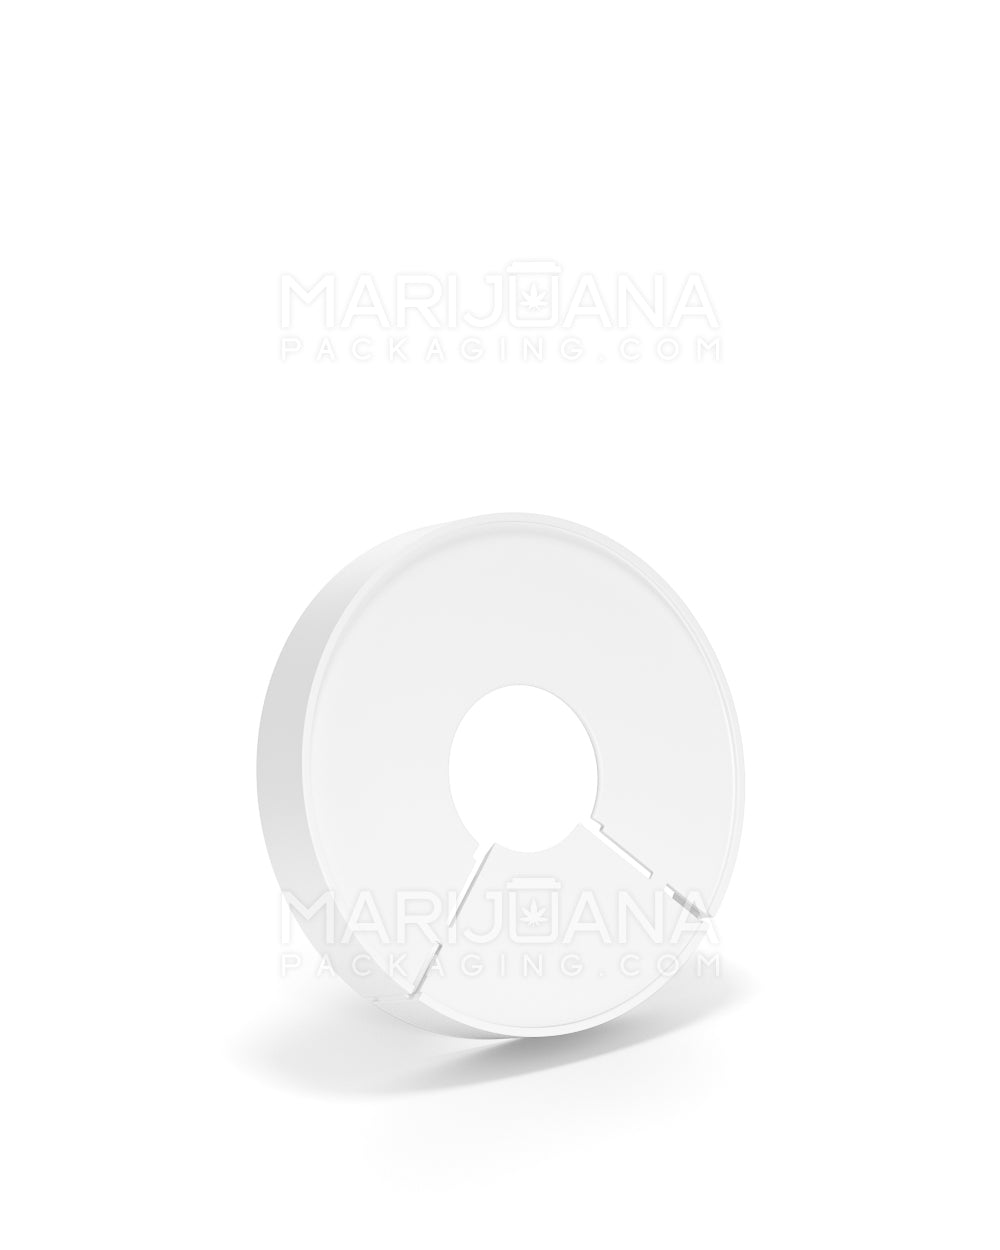 Child Resistant & Tamper Evident | Snap On Plastic Caps for Beverage Can | 53mm - Matte White - 1000 Count - 2